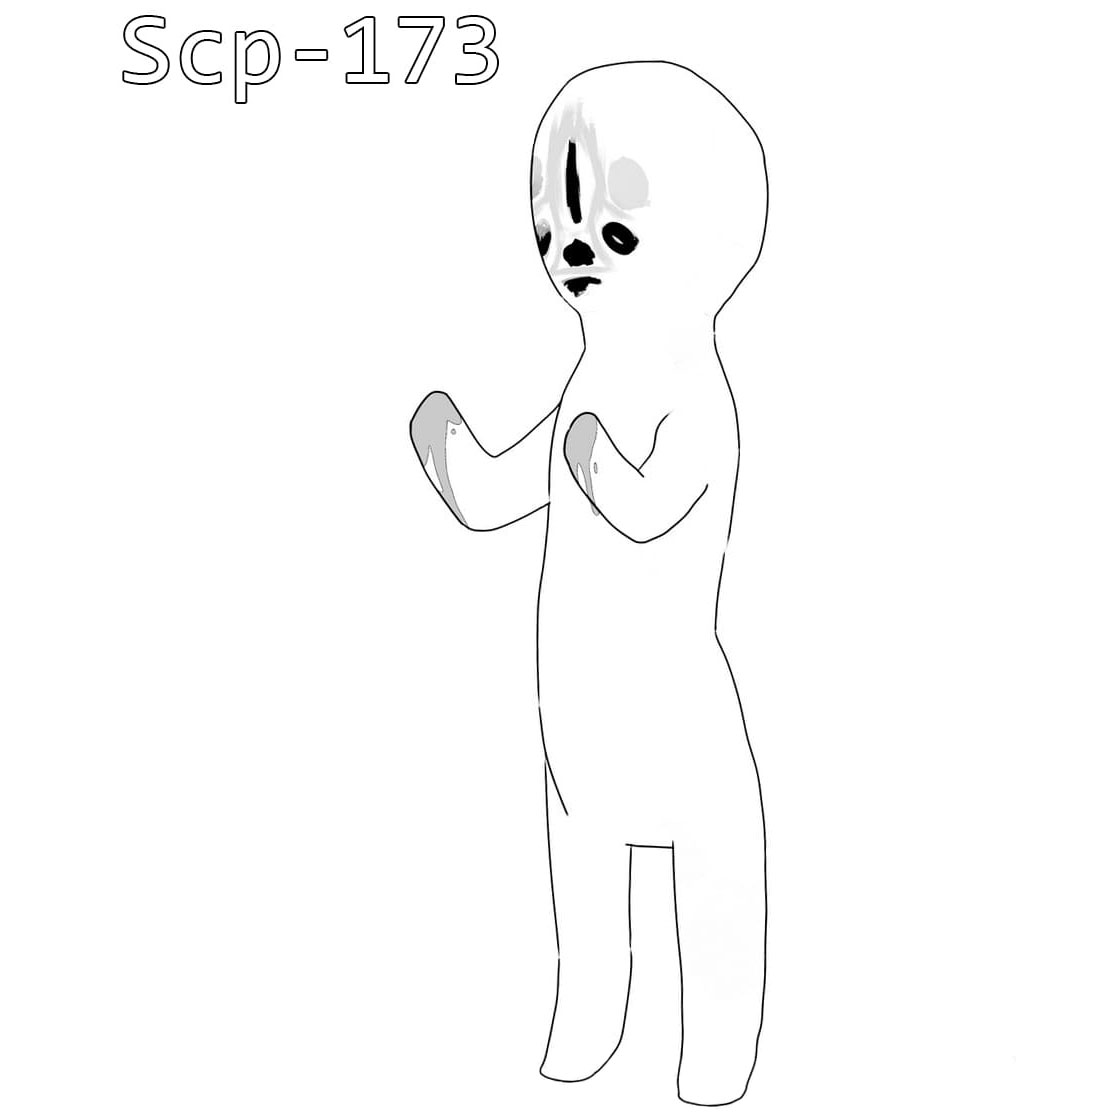 Scp-173 Coloring Pages Sticker Template.